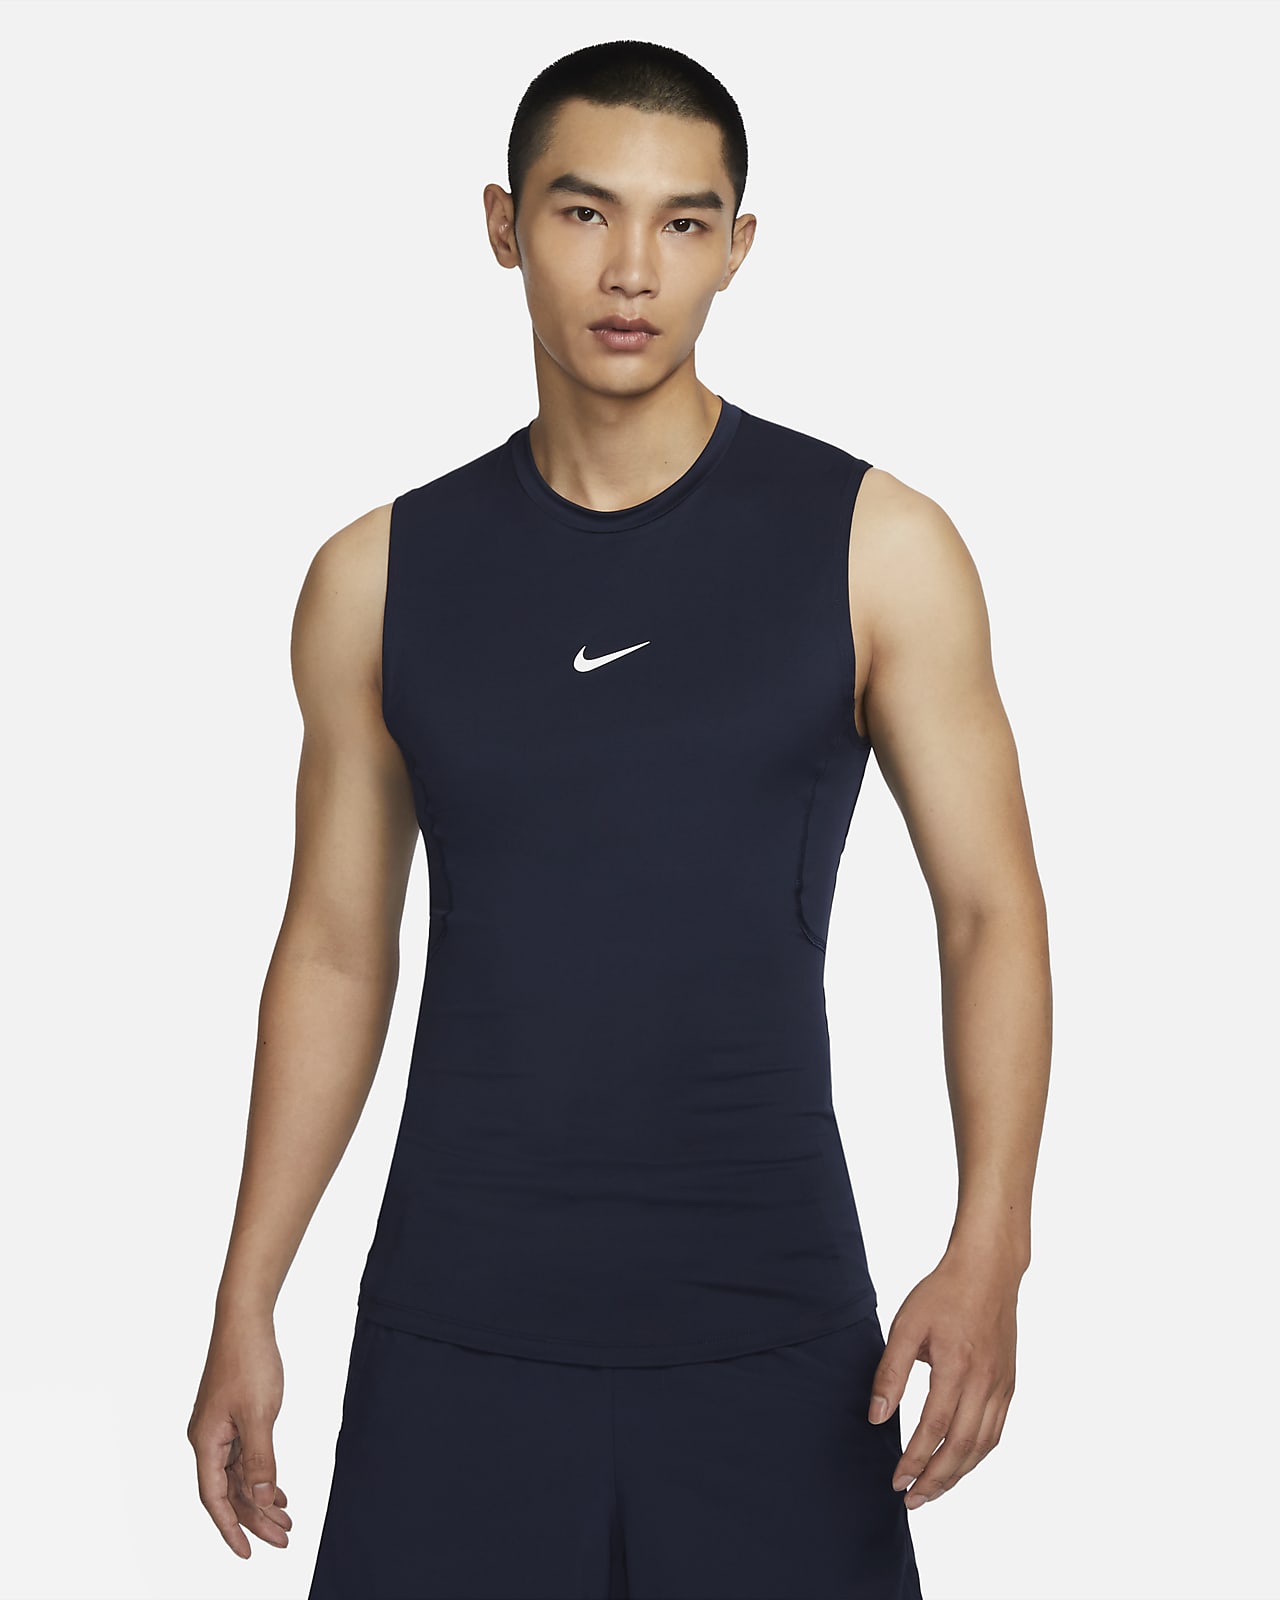  Mens Sleeveless Compression Shirt - NIKE Or Under